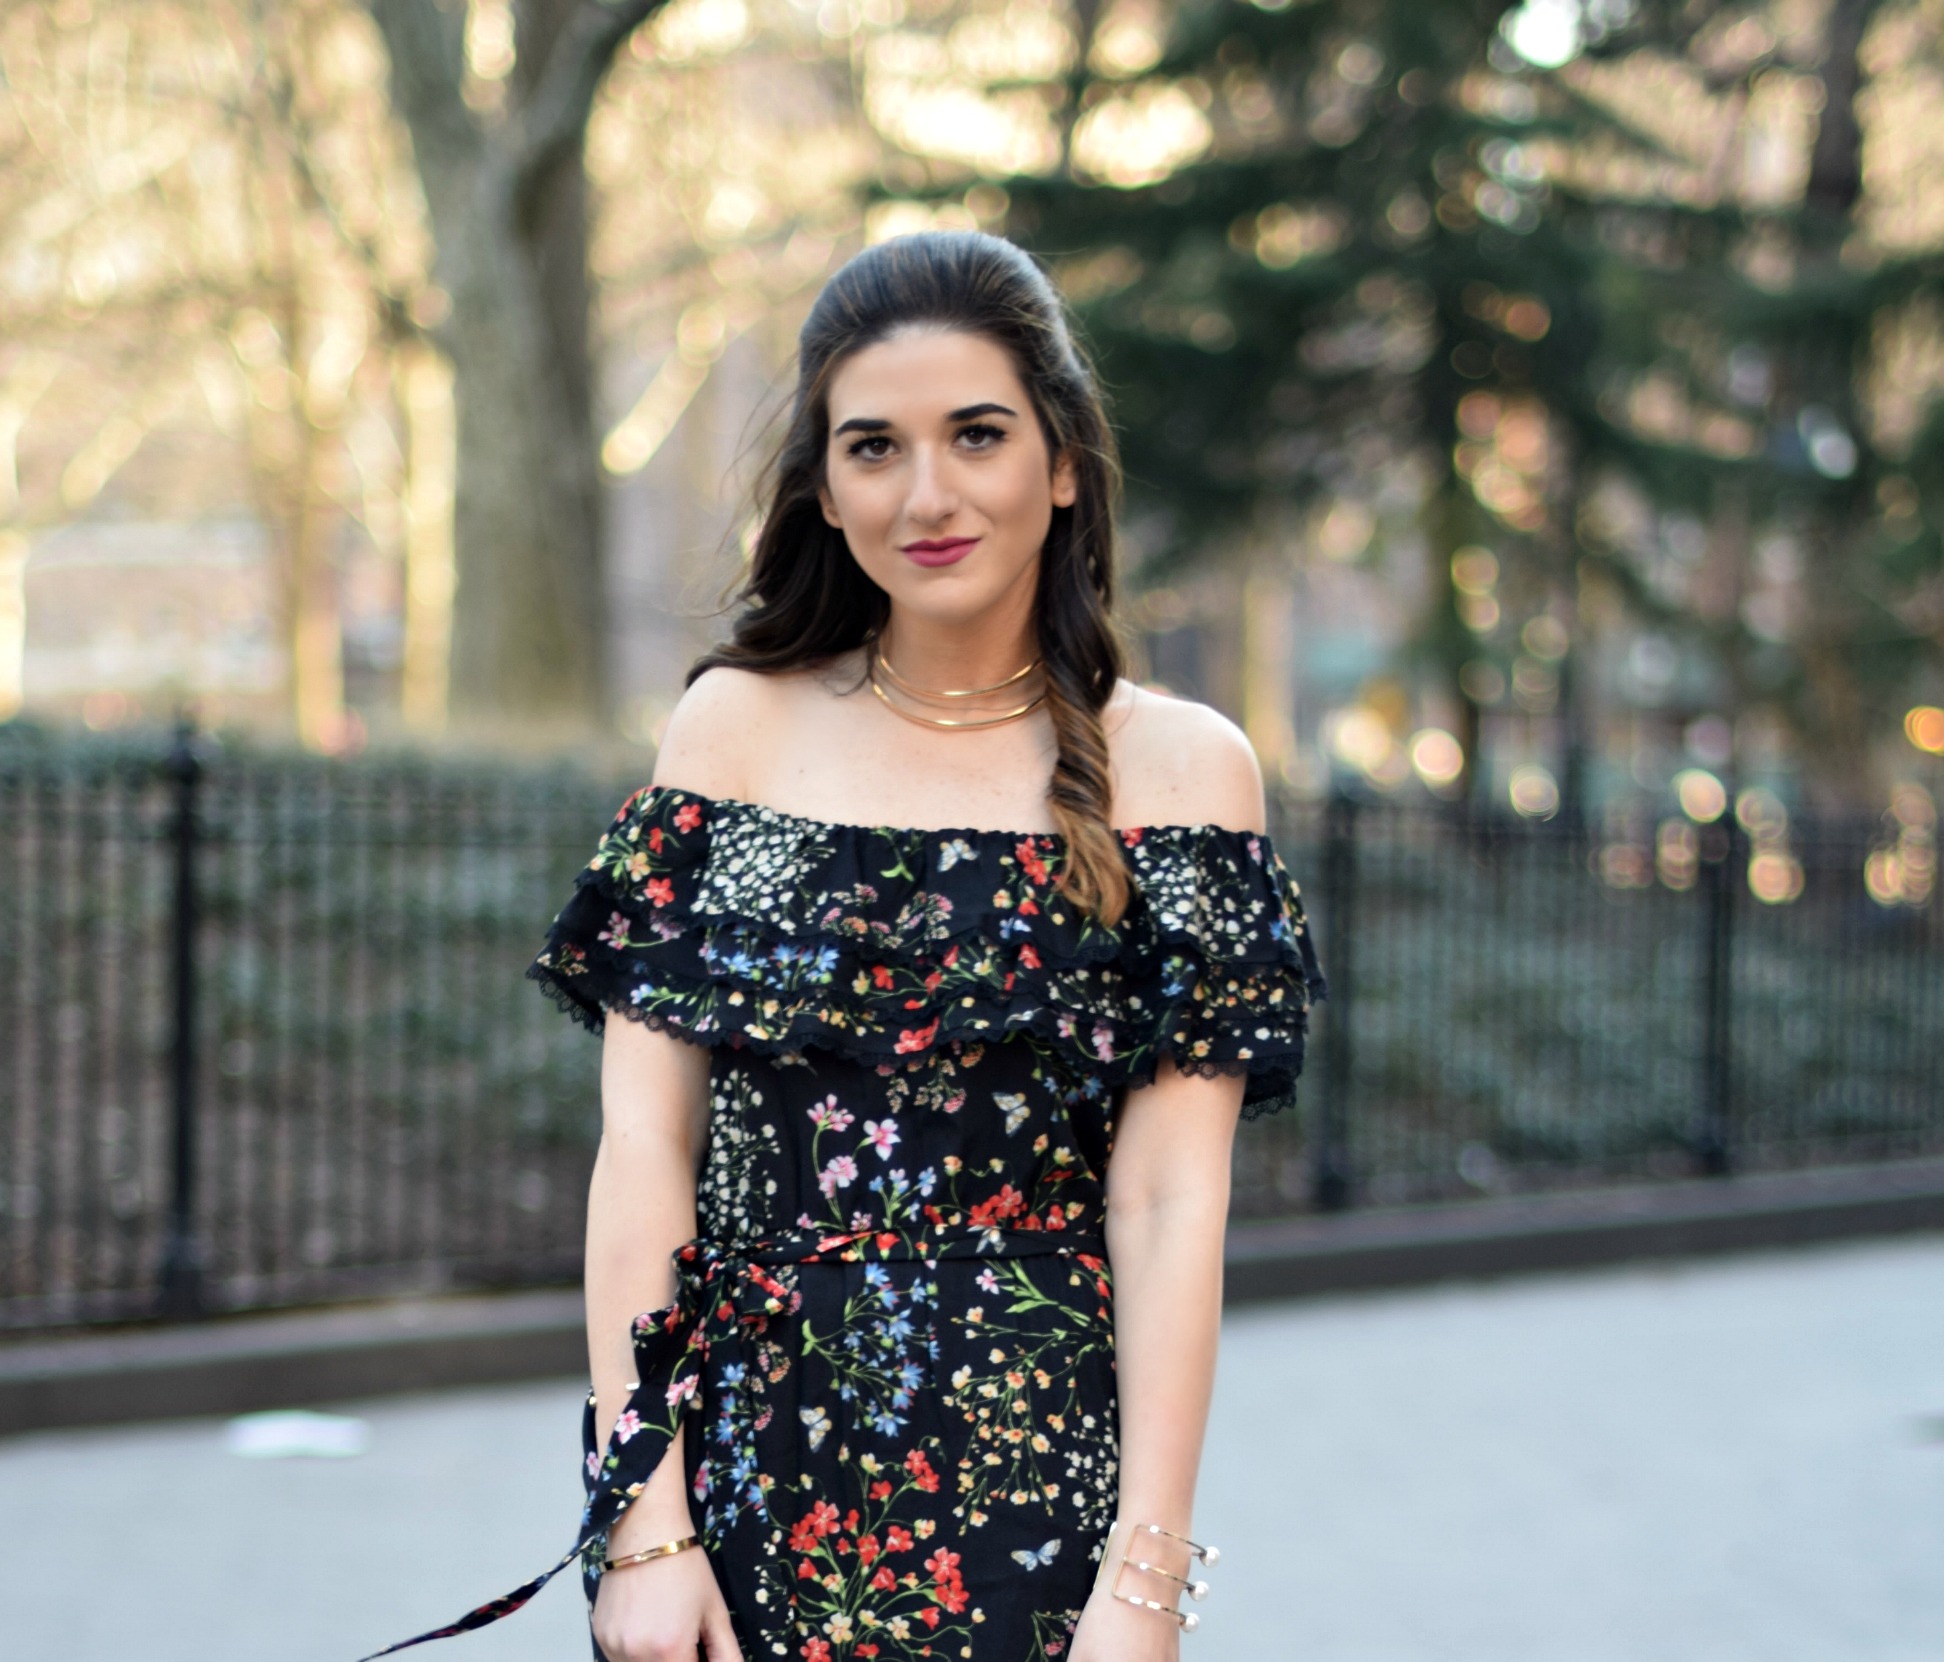 Alice Olivia Floral Dress Louboutins & Love Fashion Blog Esther Santer NYC Street Style Blogger Outfit OOTD Trunk Club Lydell Hair Brunette Model New York City Photoshoot Spring Summer Bracelet Gold Choker Jewelry Pretty Beautiful Inspo Shoulder Shoes.jpg